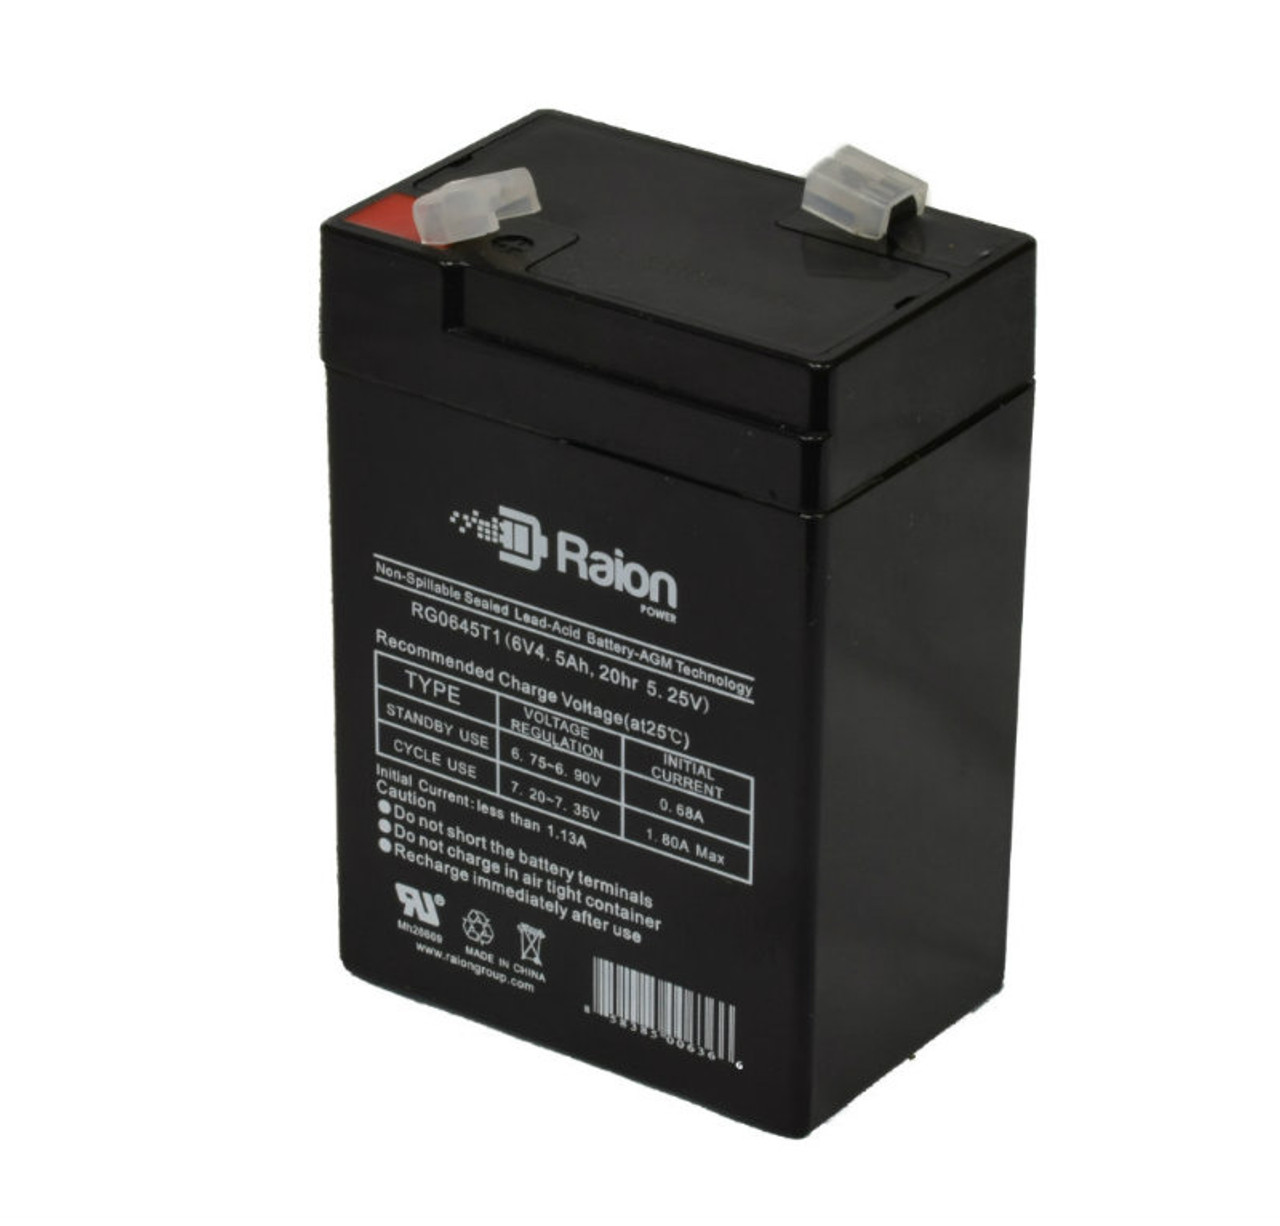 Raion Power RG0645T1 6V 4.5Ah Replacement Battery Cartridge for Aokly Power 3-FM-5